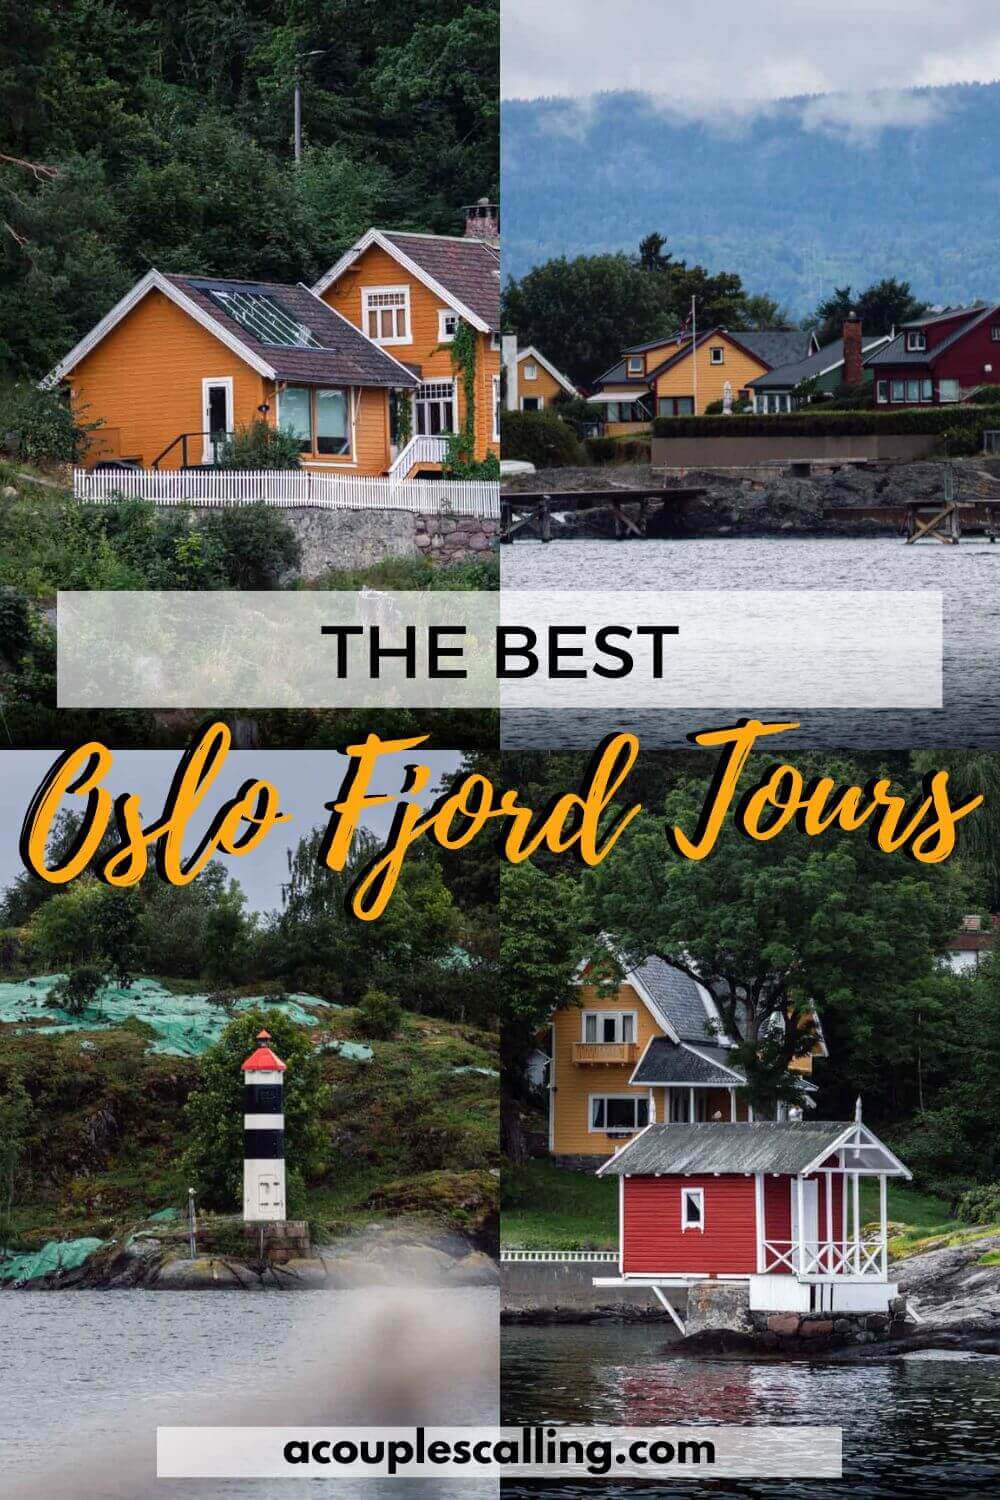 Best fjord tours from Oslo